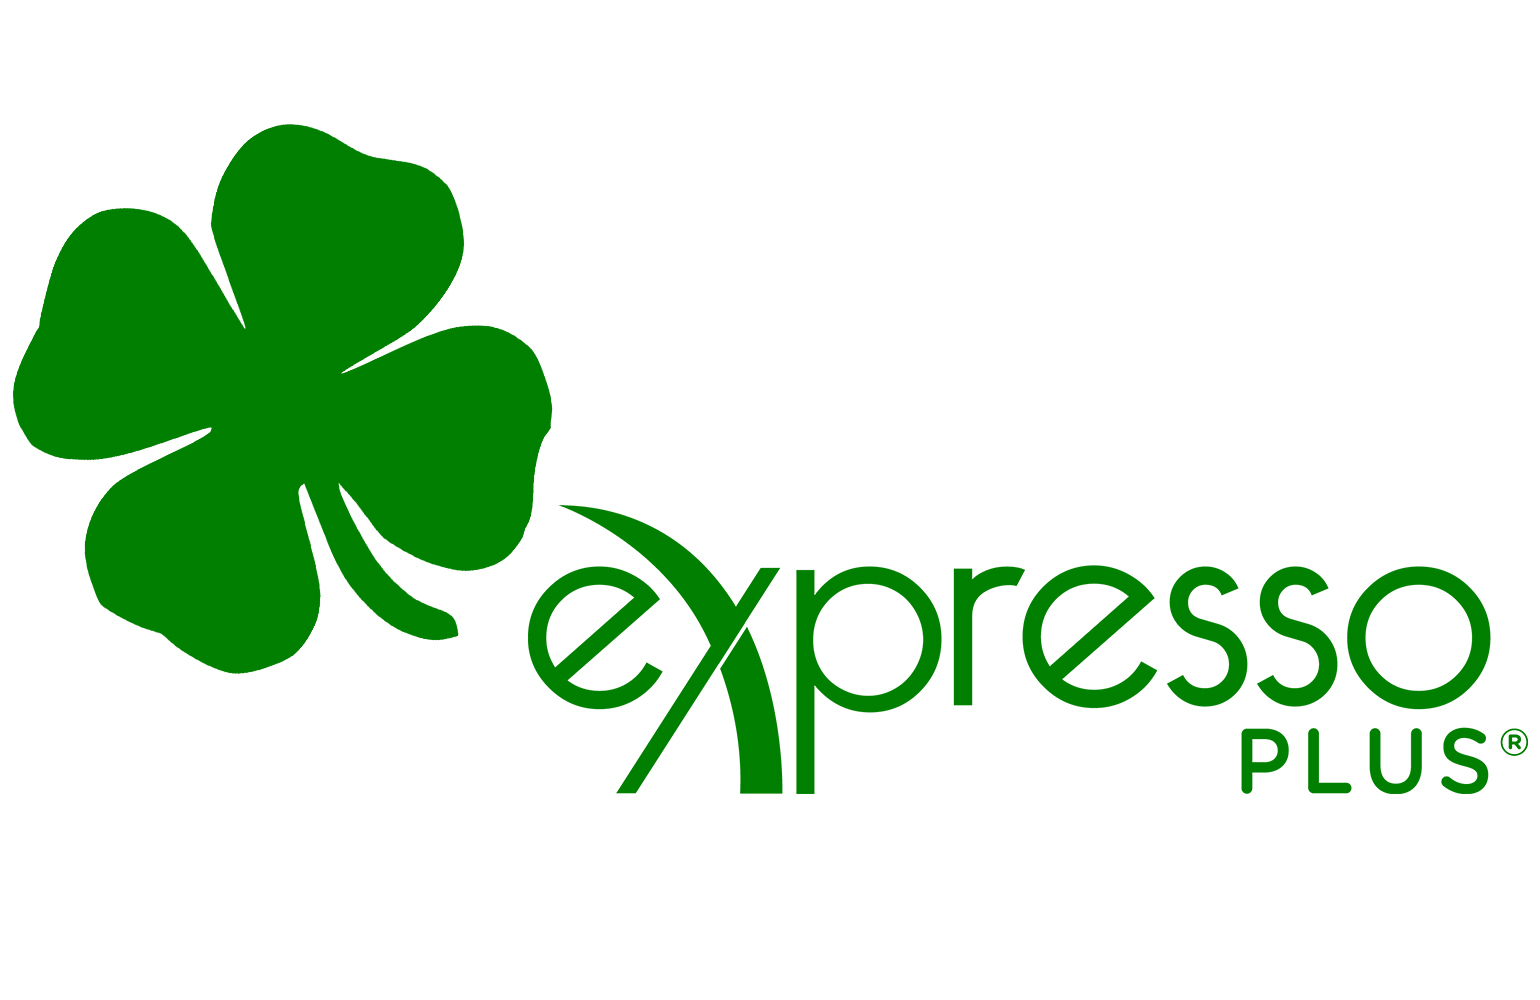 Coffee Vending Machines in Ireland by eXpresso PLUS